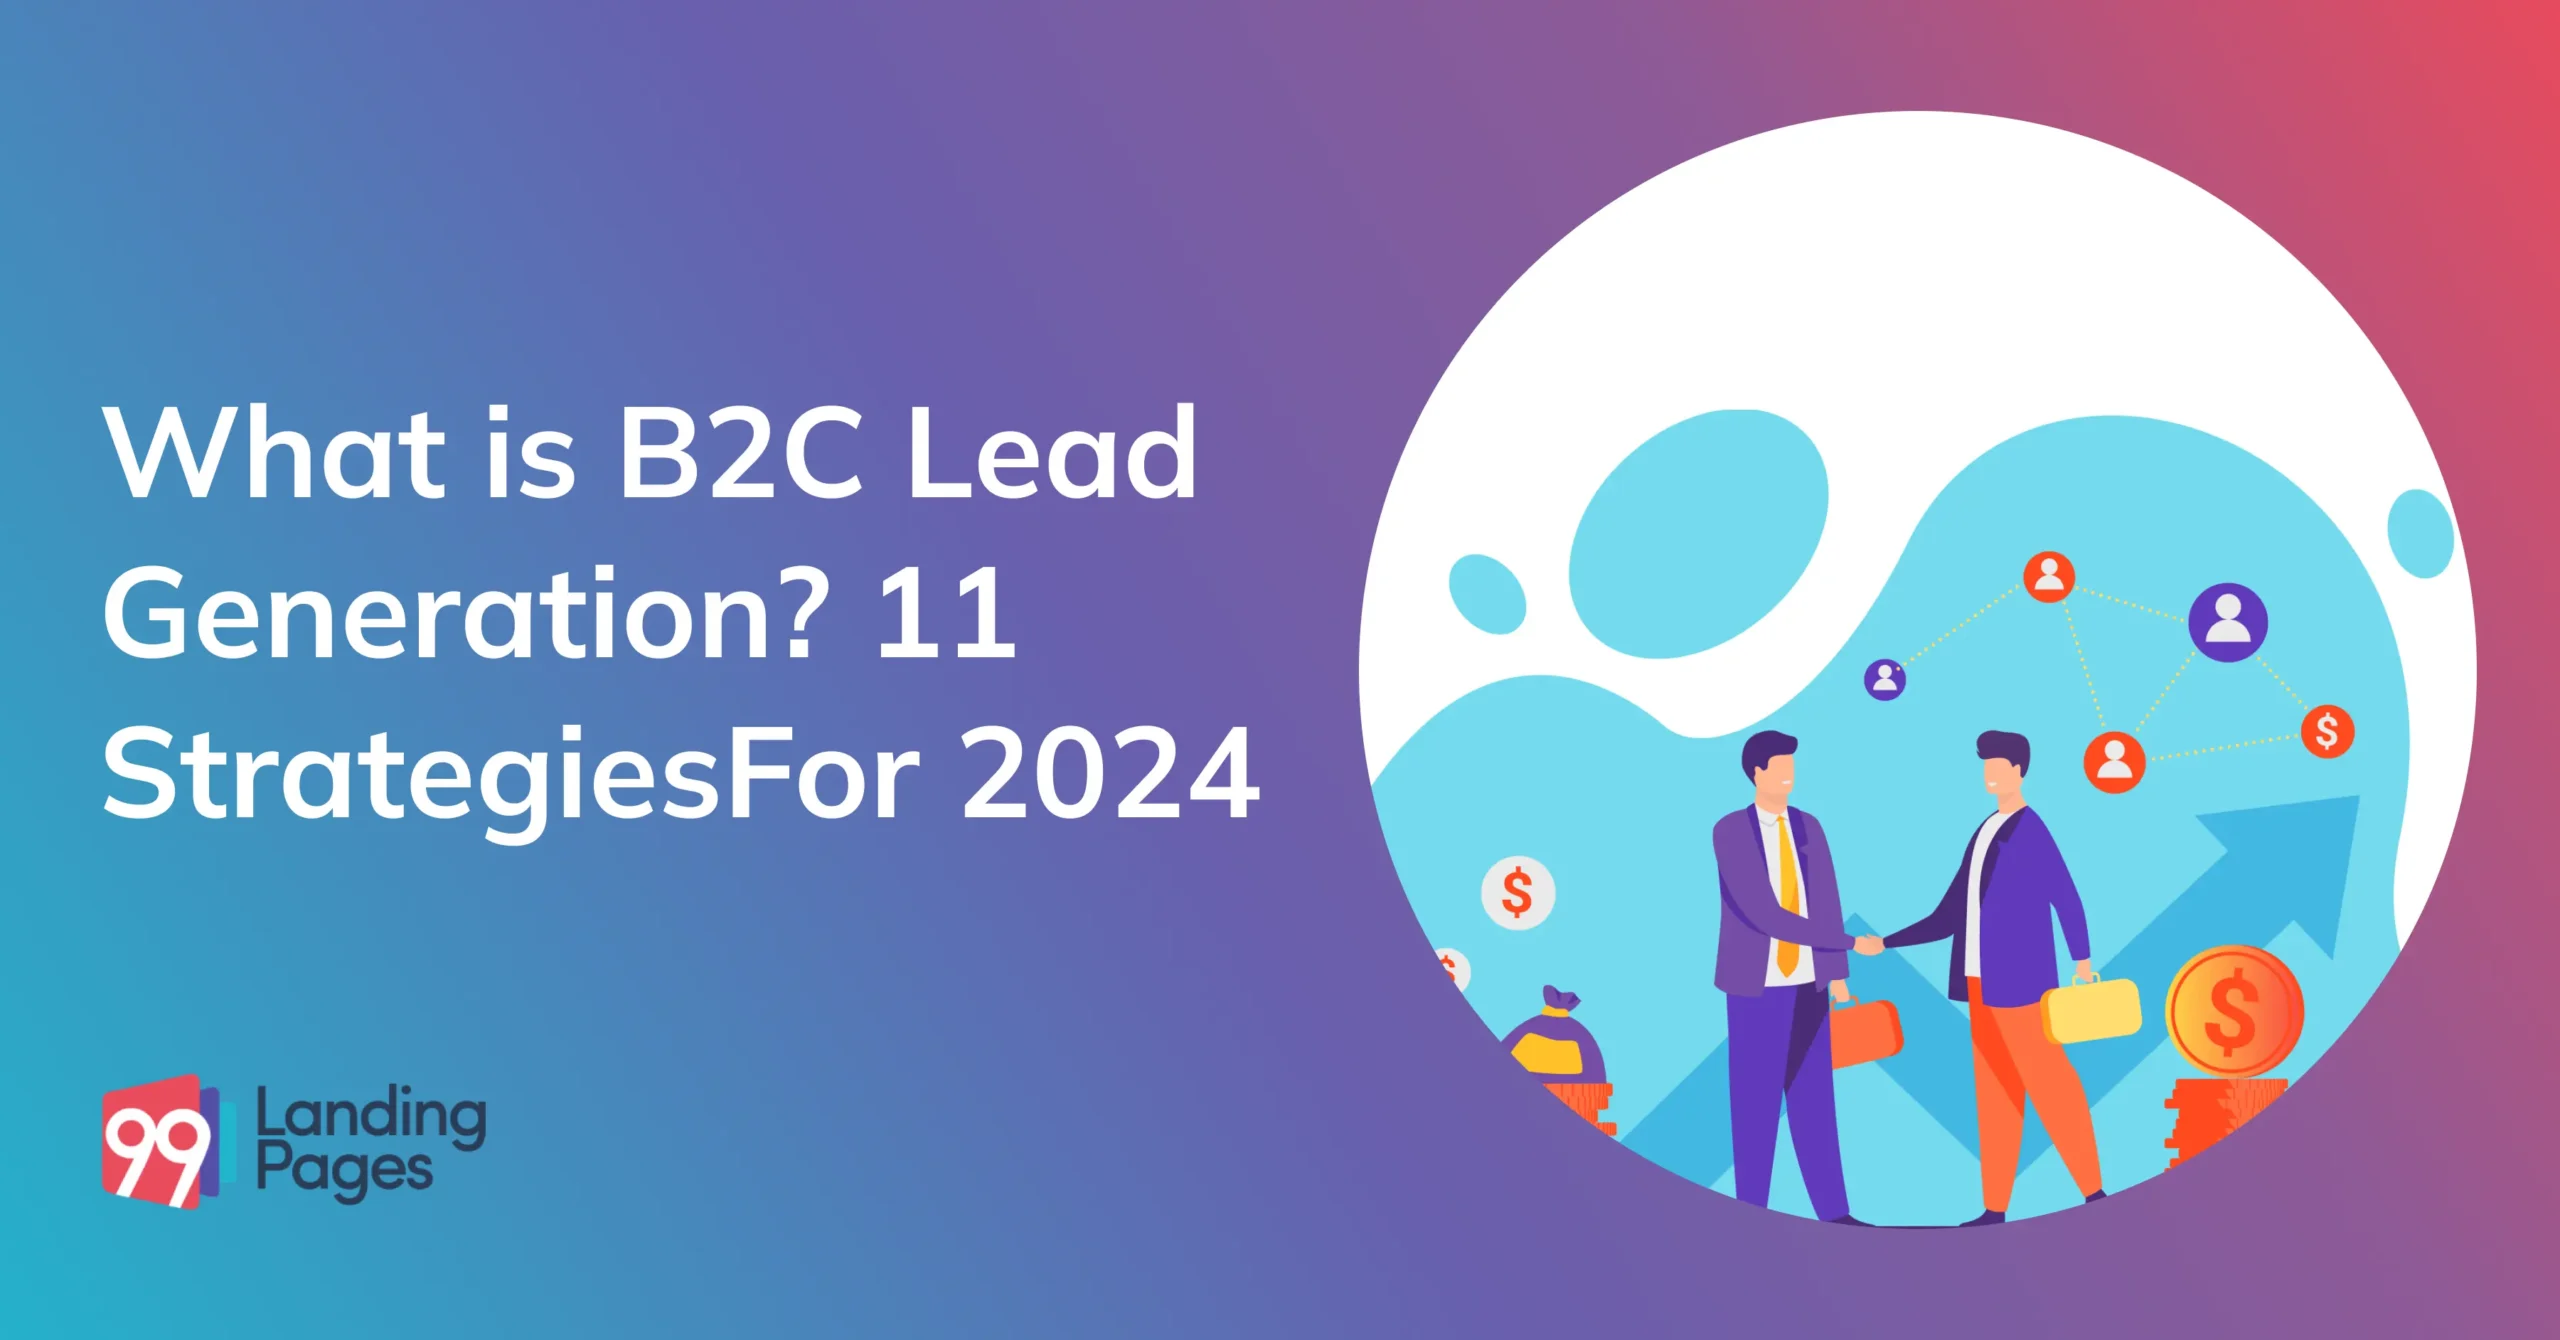 What is B2C Lead Generation? 11 Strategies For 2024